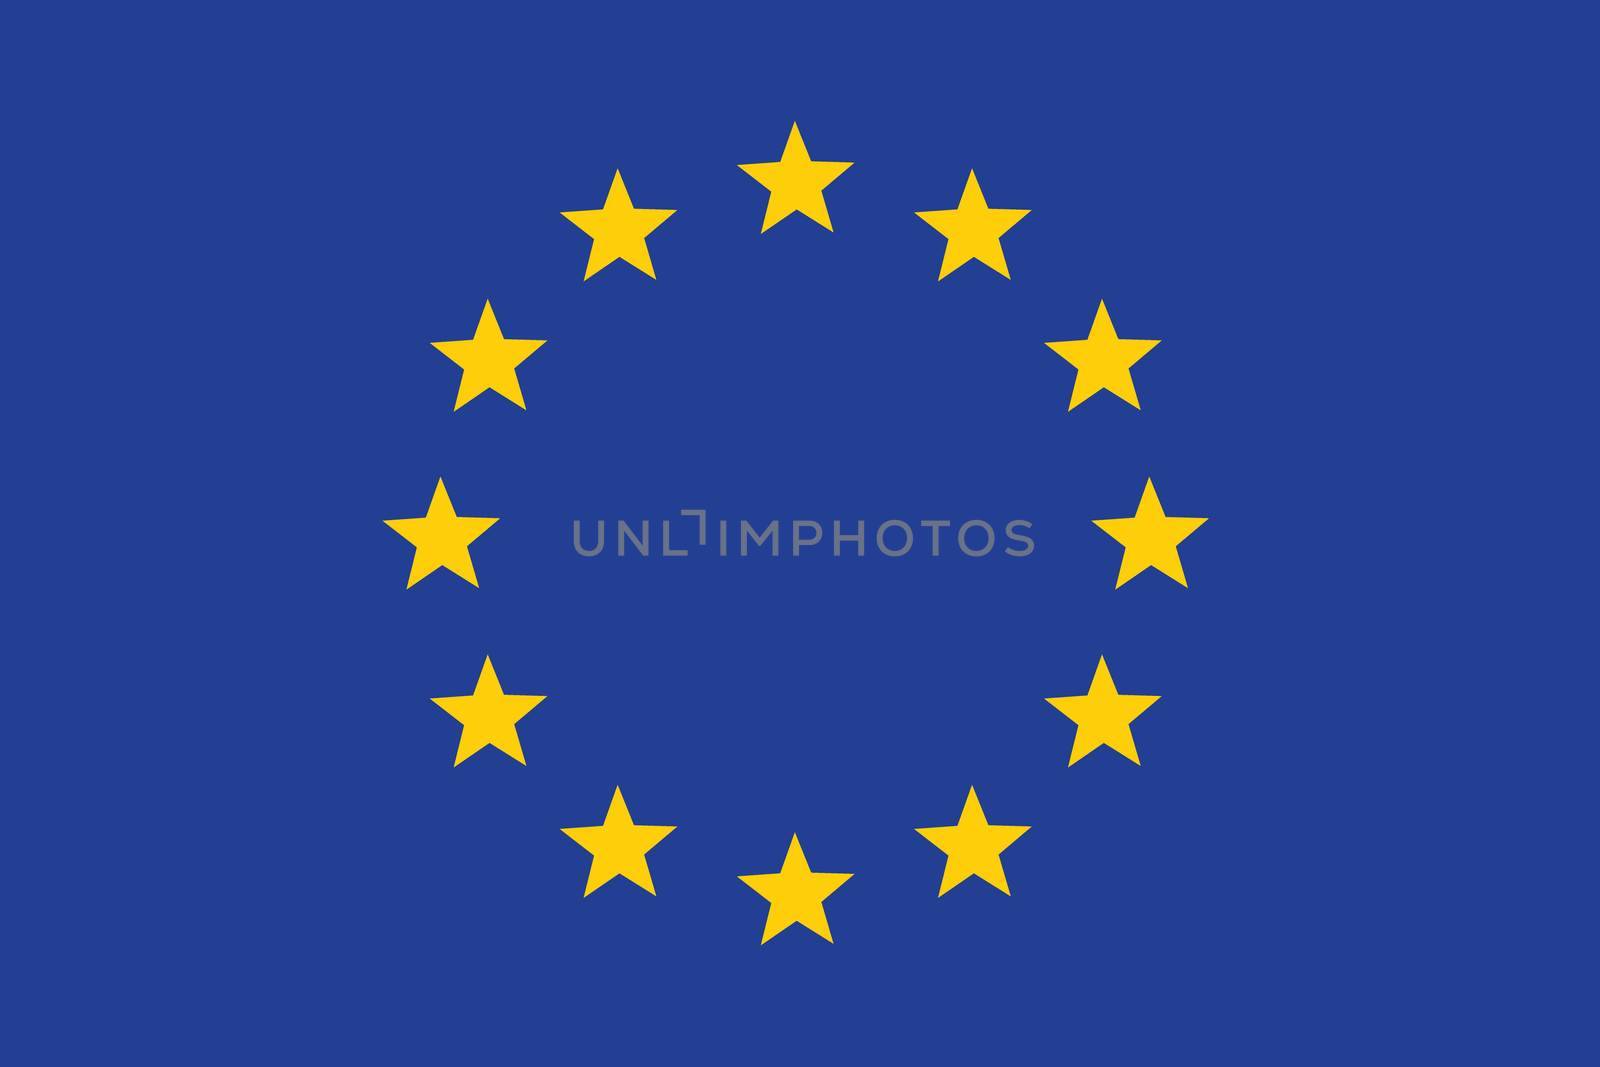 A Flag of European Union in blue and white